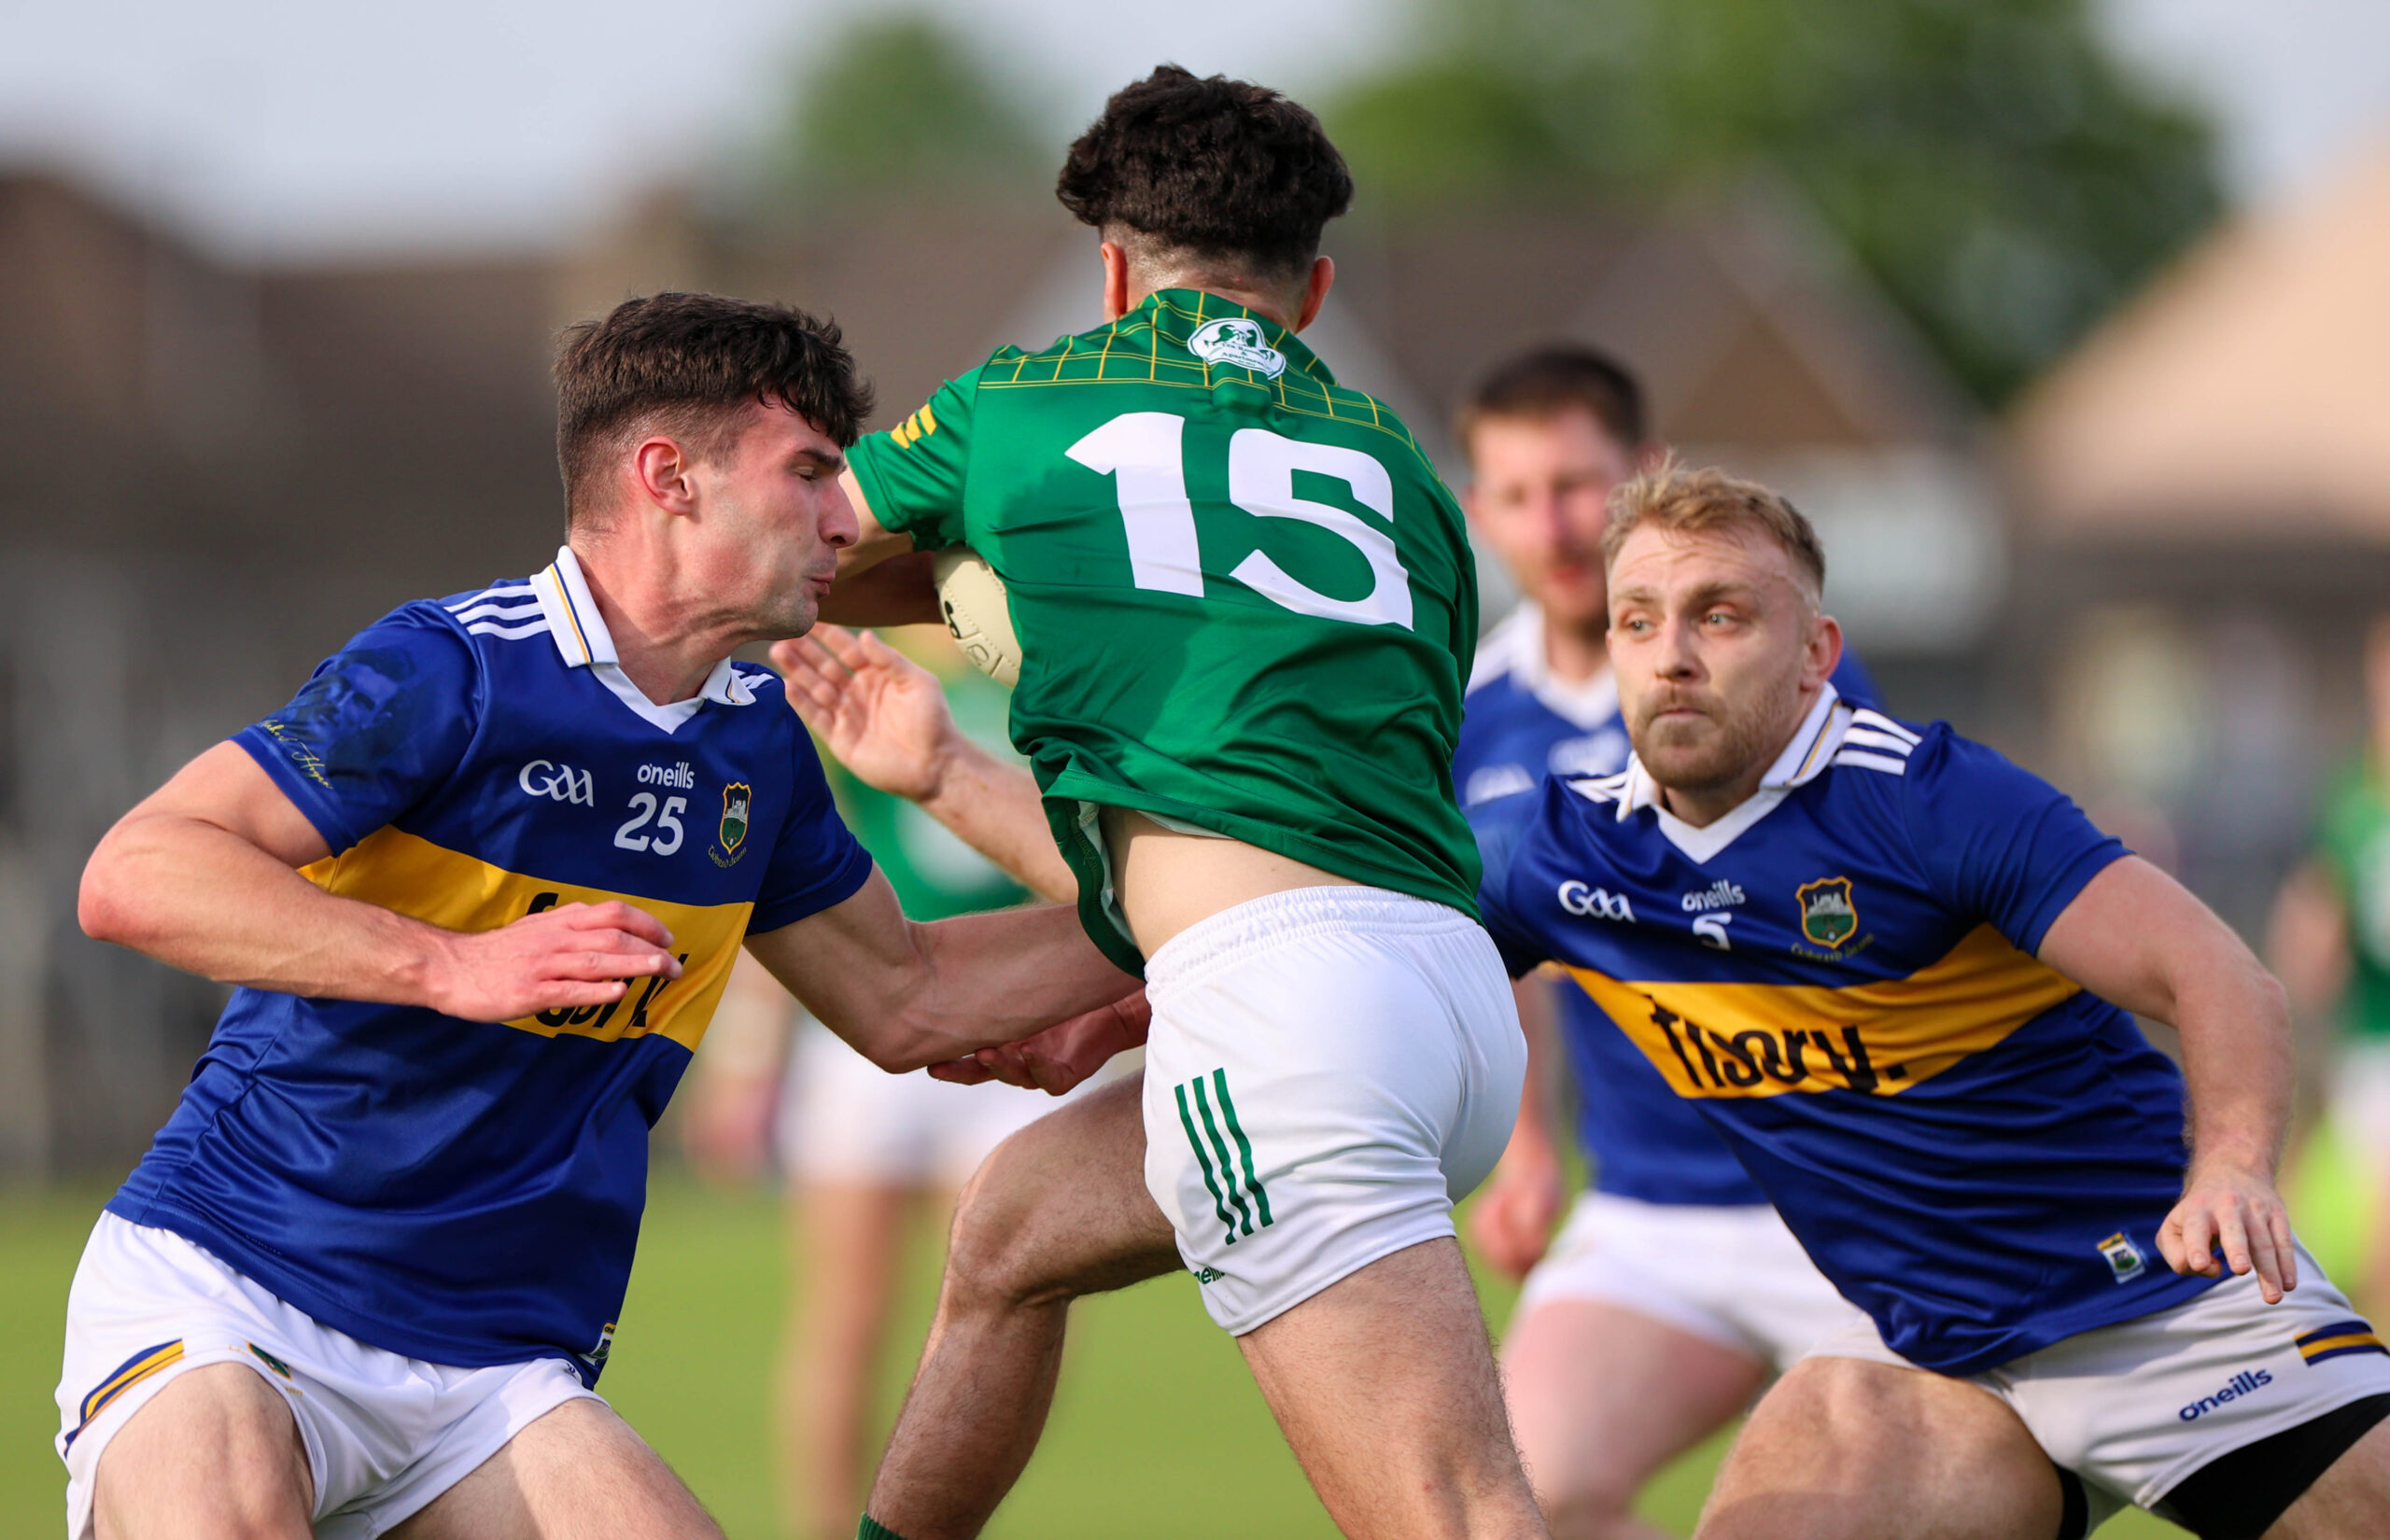 McGowan returns to the fray for trip to Waterford